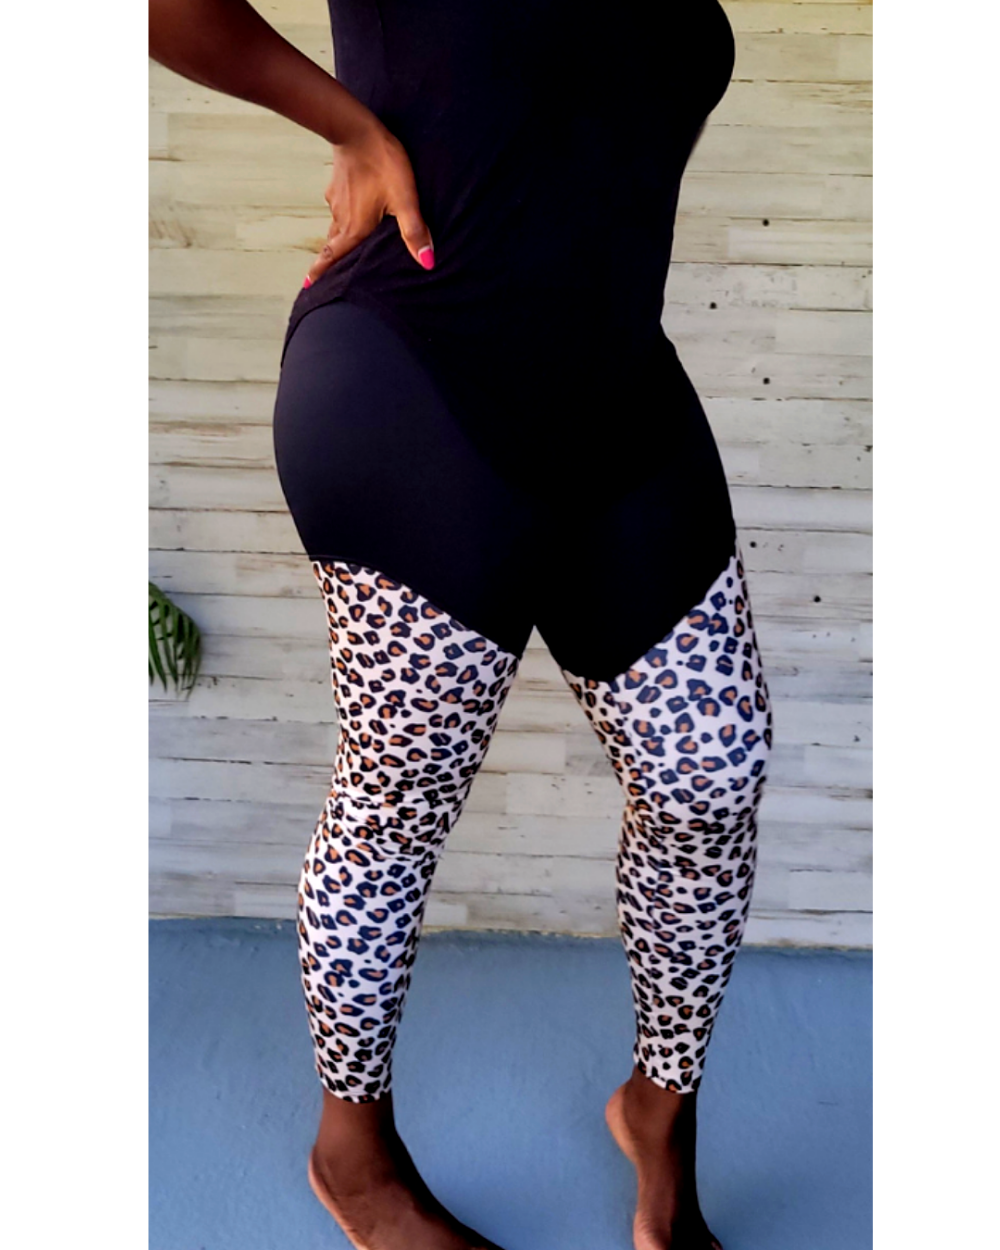 Womens Sports Leggings, Compression Leggings With Leopard Print